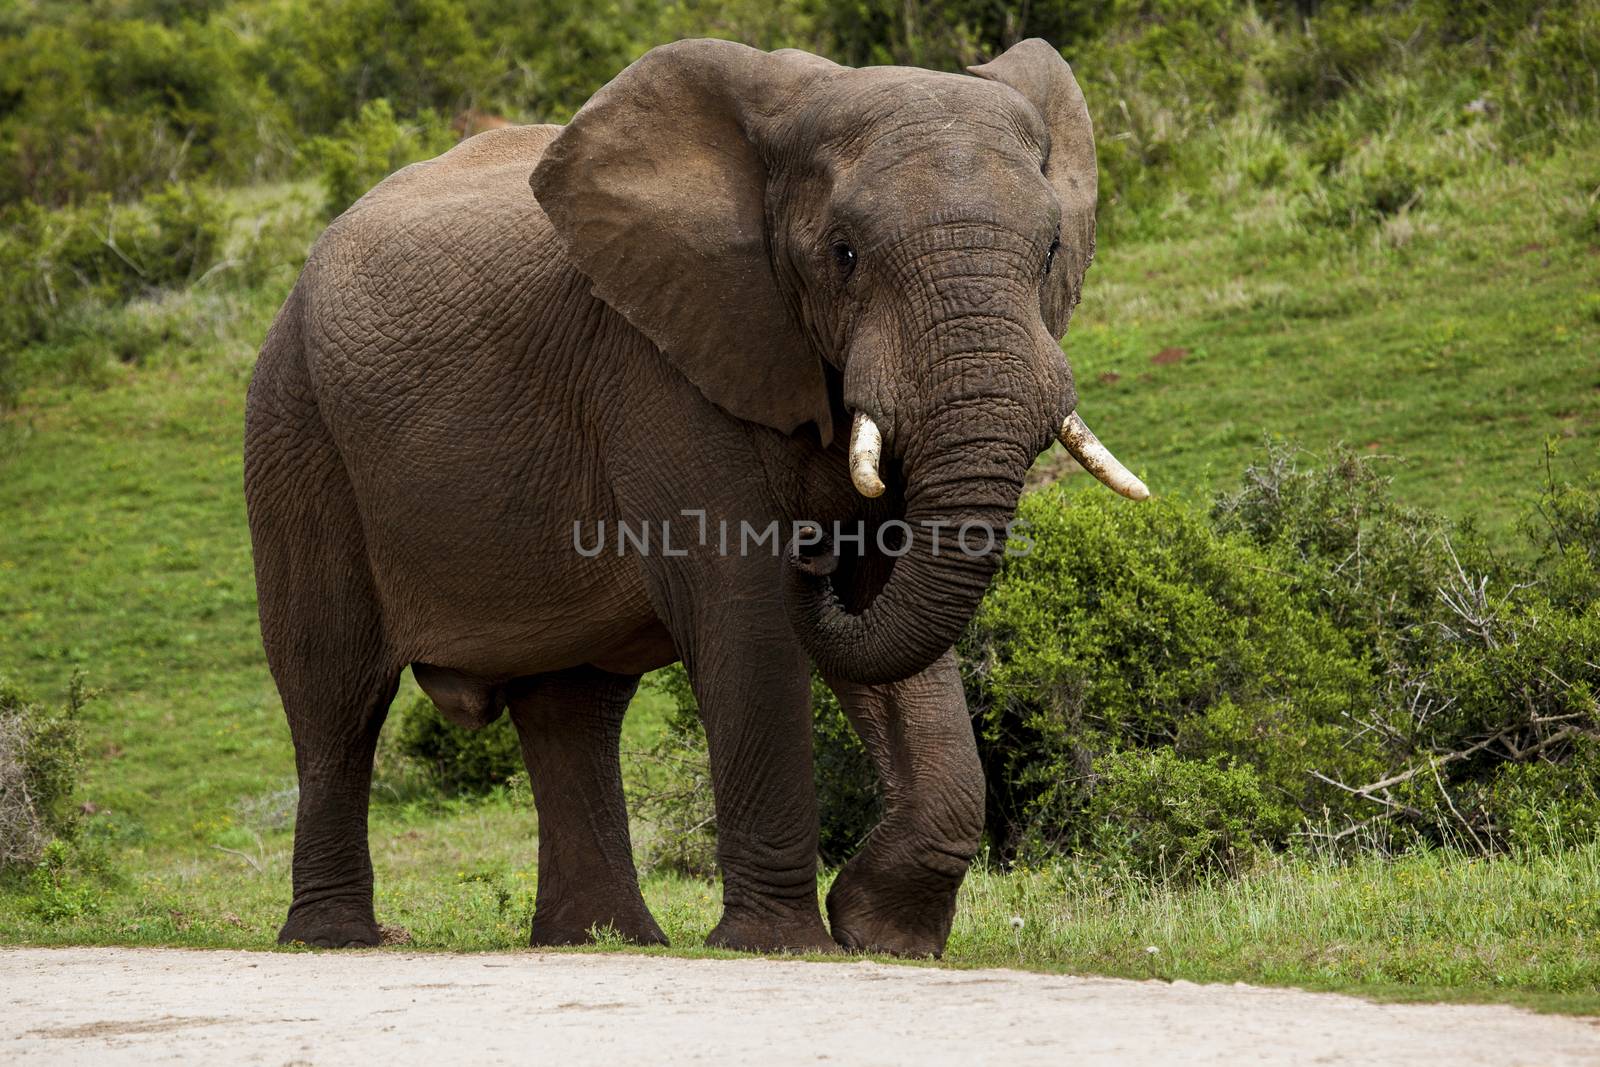 Elephant bull walking on the road in a safari park in South Africa.